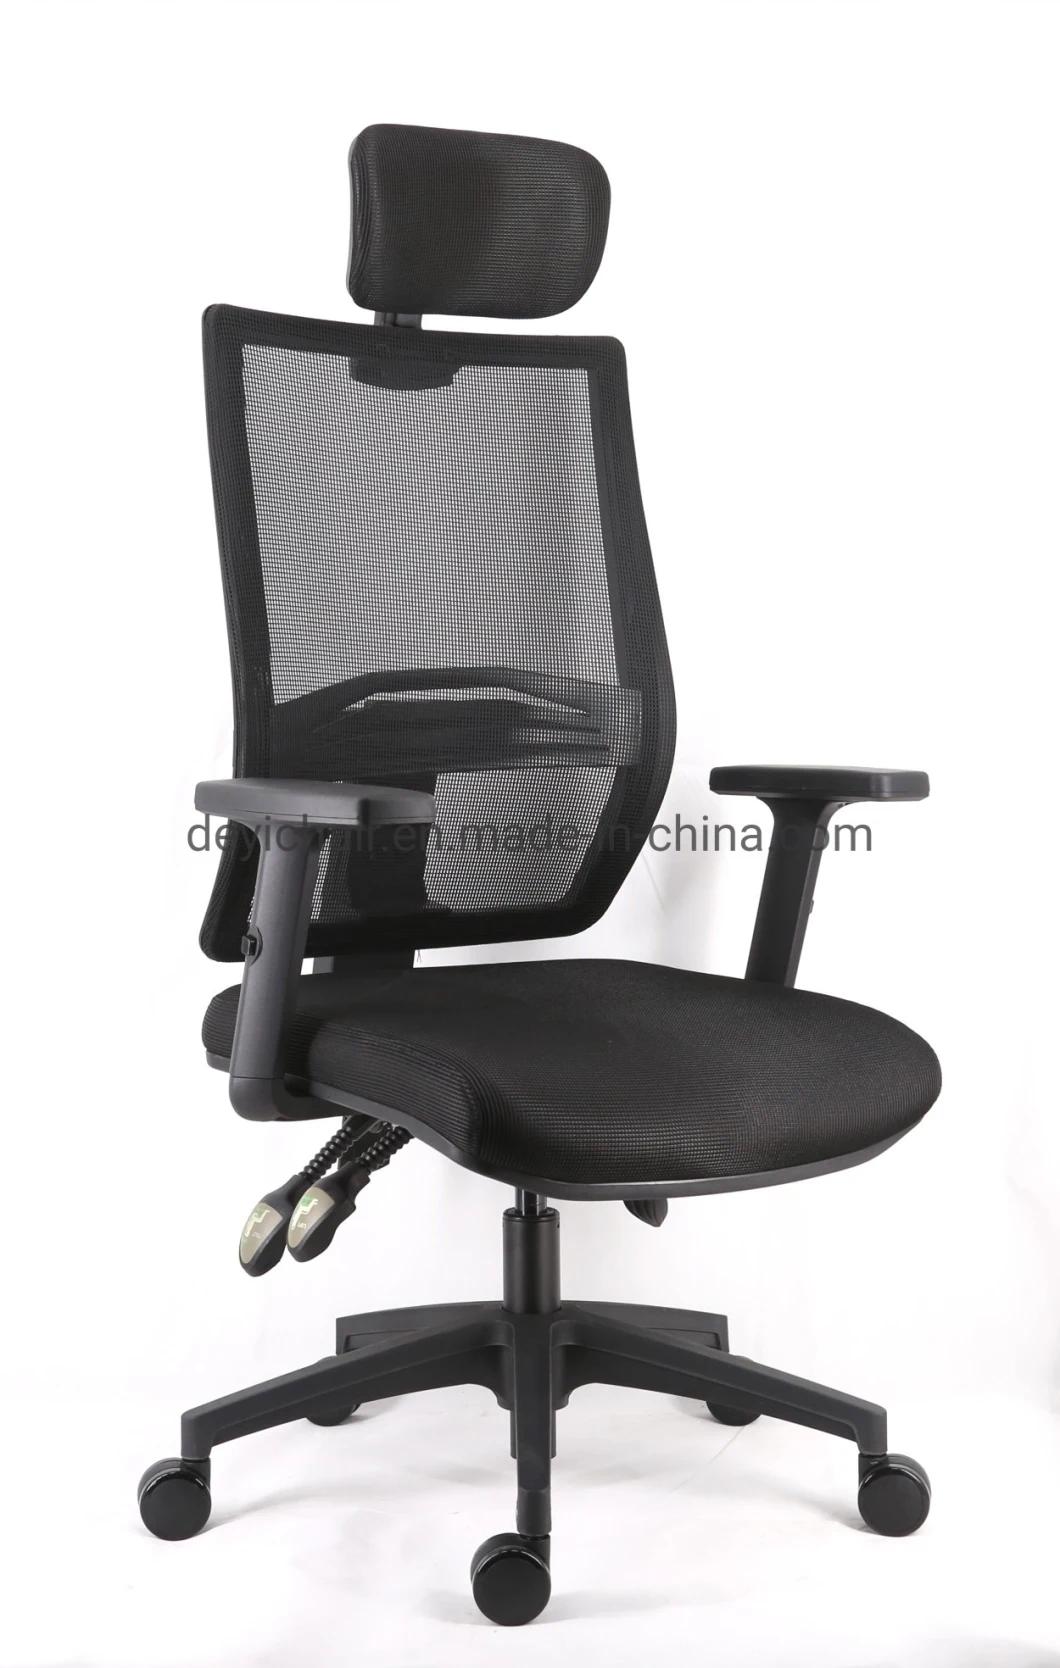 Mesh Upholstery Backrest with Lumbar Support Adjustable Armrest Simple Function Seat up and Down Mechanism Nylon Base Chair